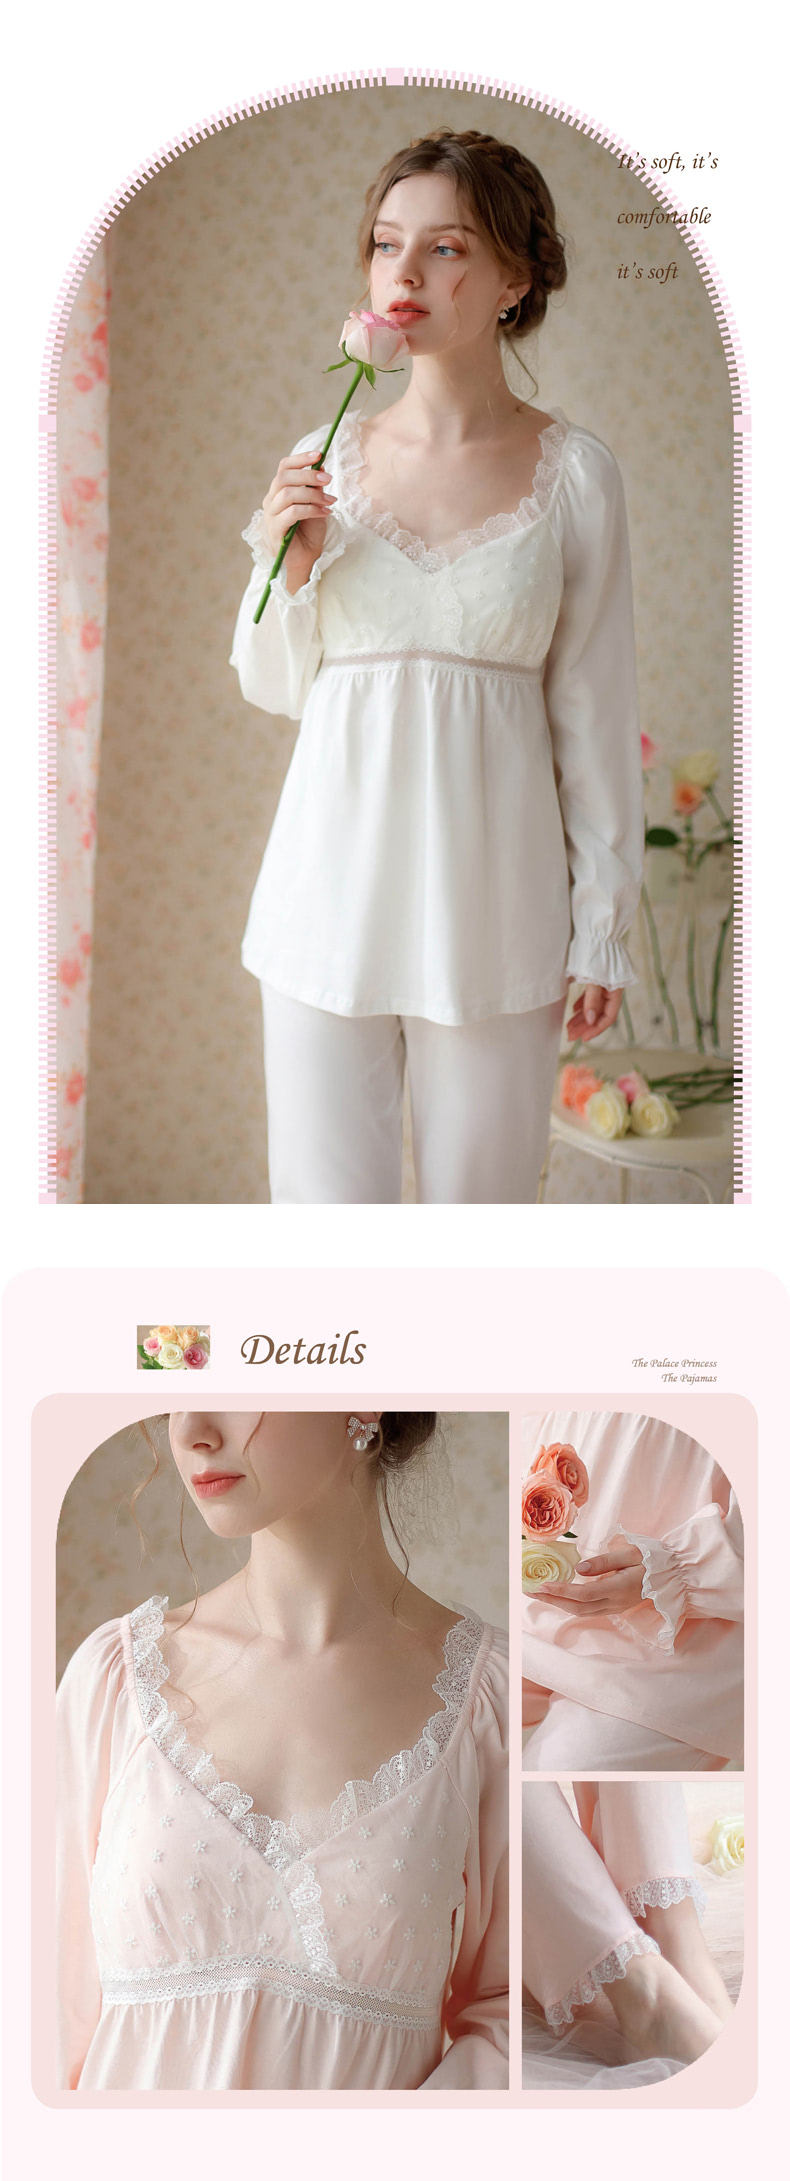 Vintage-Sweet-Cotton-Long-Sleeve-Home-Casual-Clothes-Set10.jpg